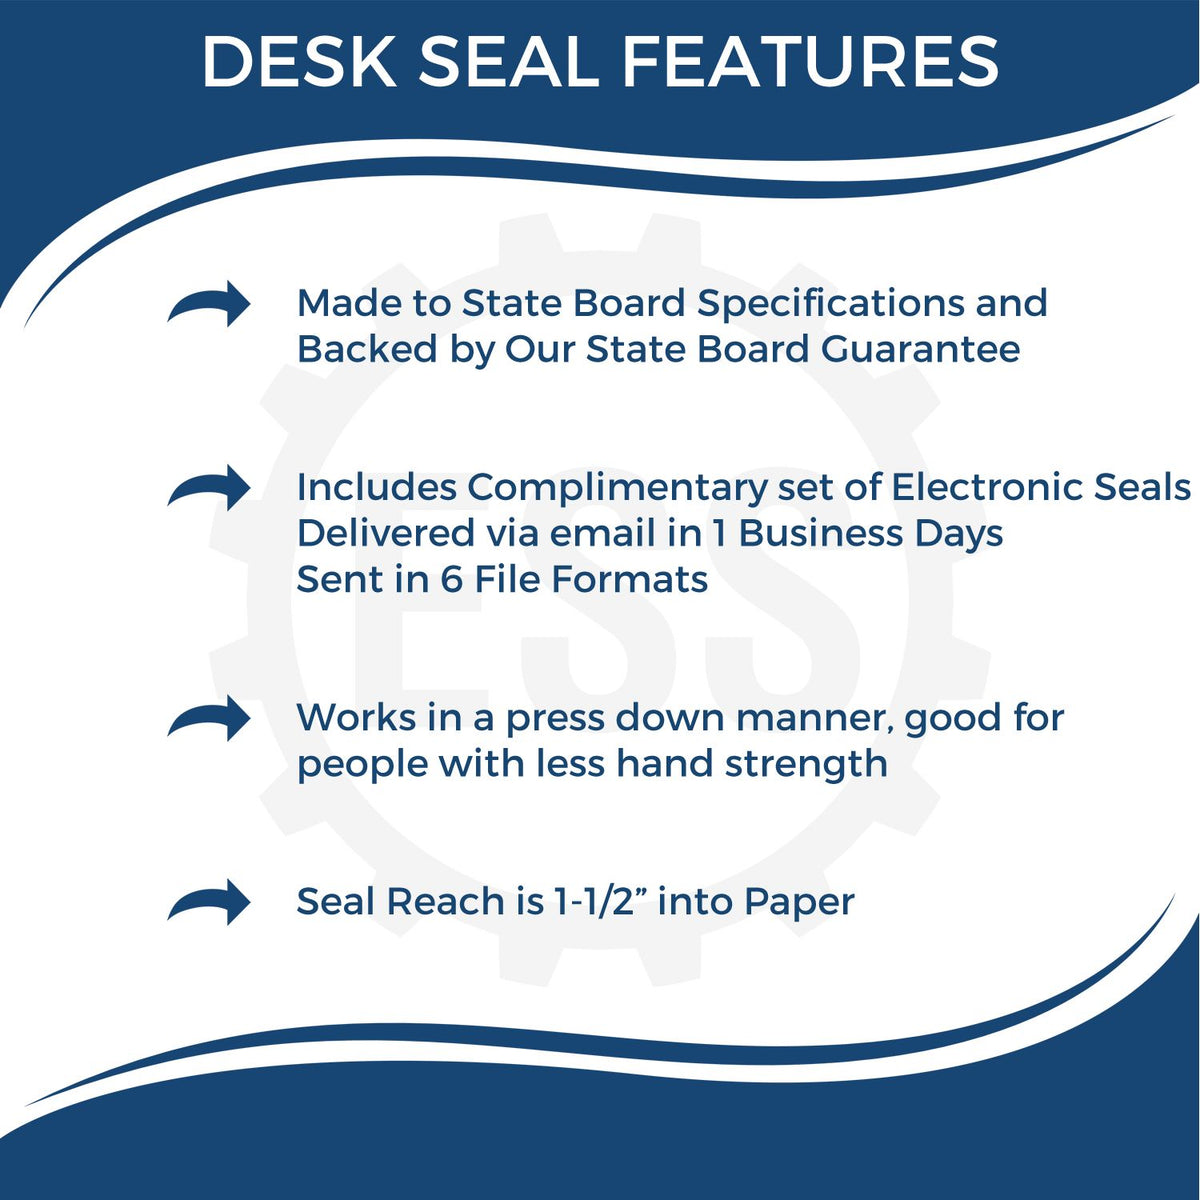 A picture of an infographic highlighting the selling points for the Kansas Desk Surveyor Seal Embosser